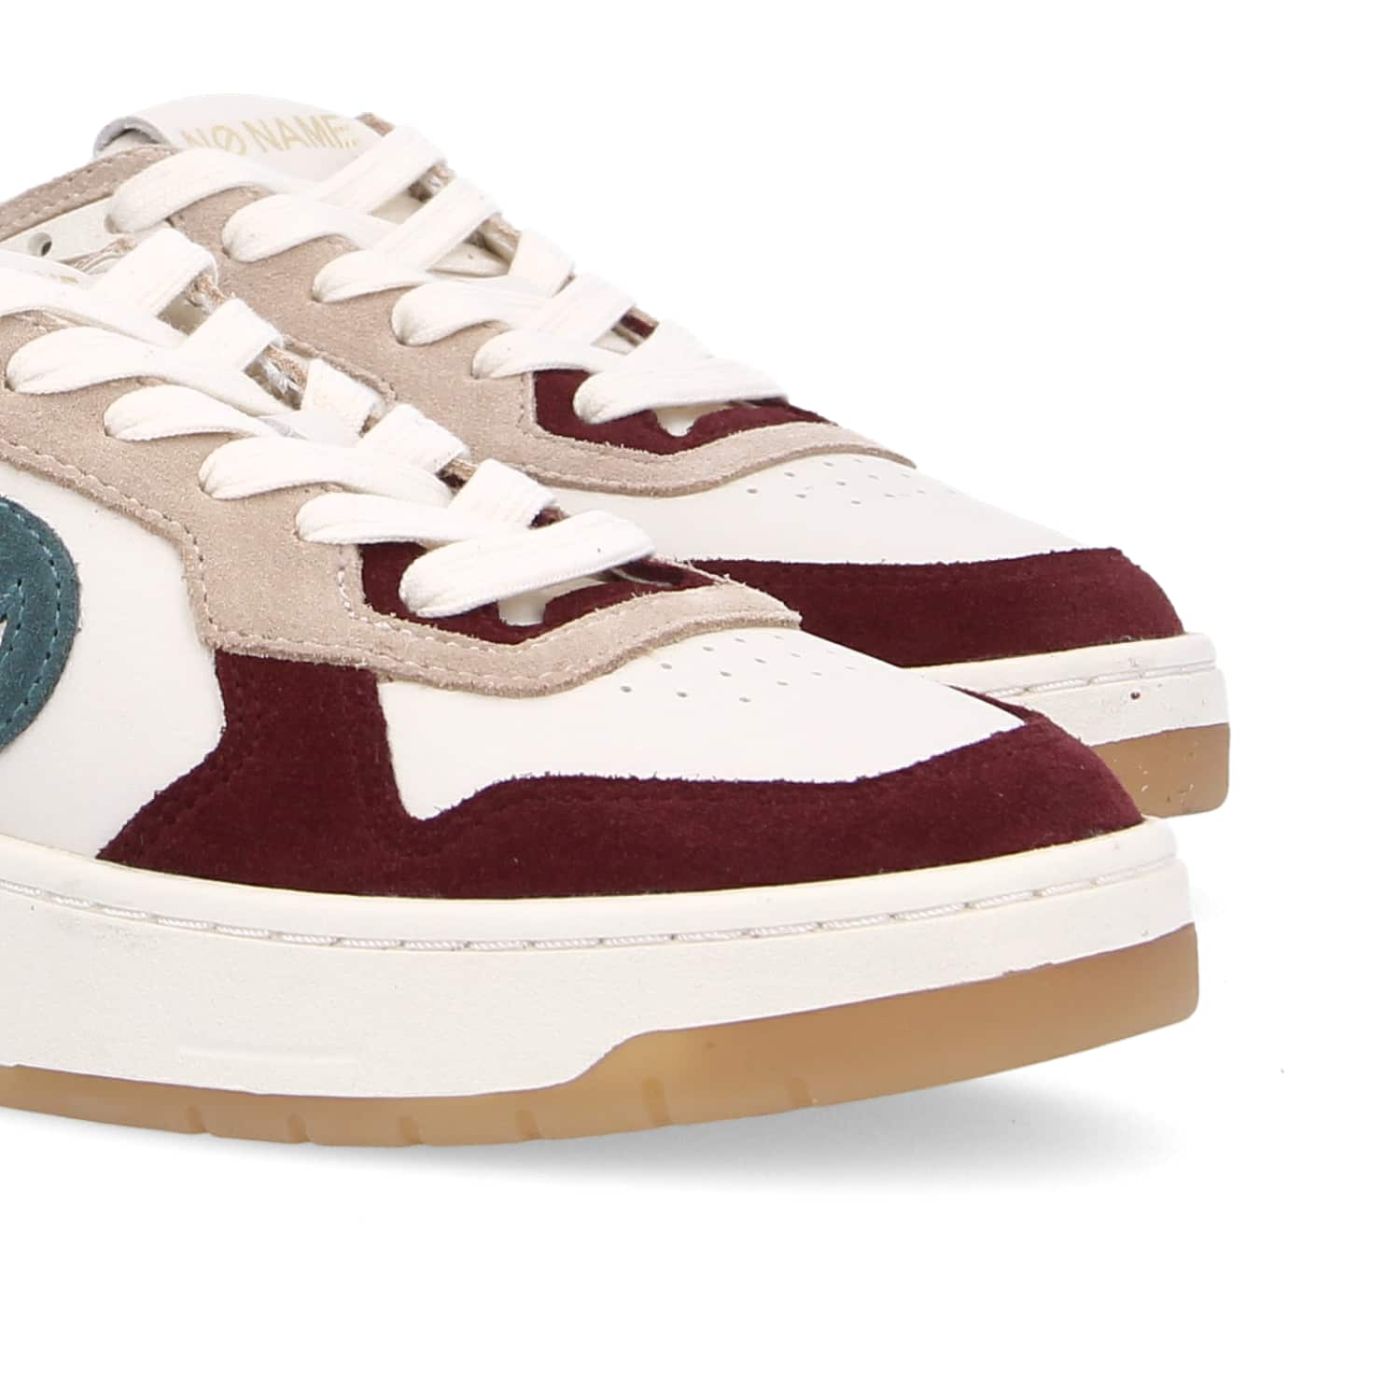 Sneakers à lacets KELLY SNEAKER SOFTNAPPA/SUEDE OFF WHITE/BURGUNDY No  Name pour Femme